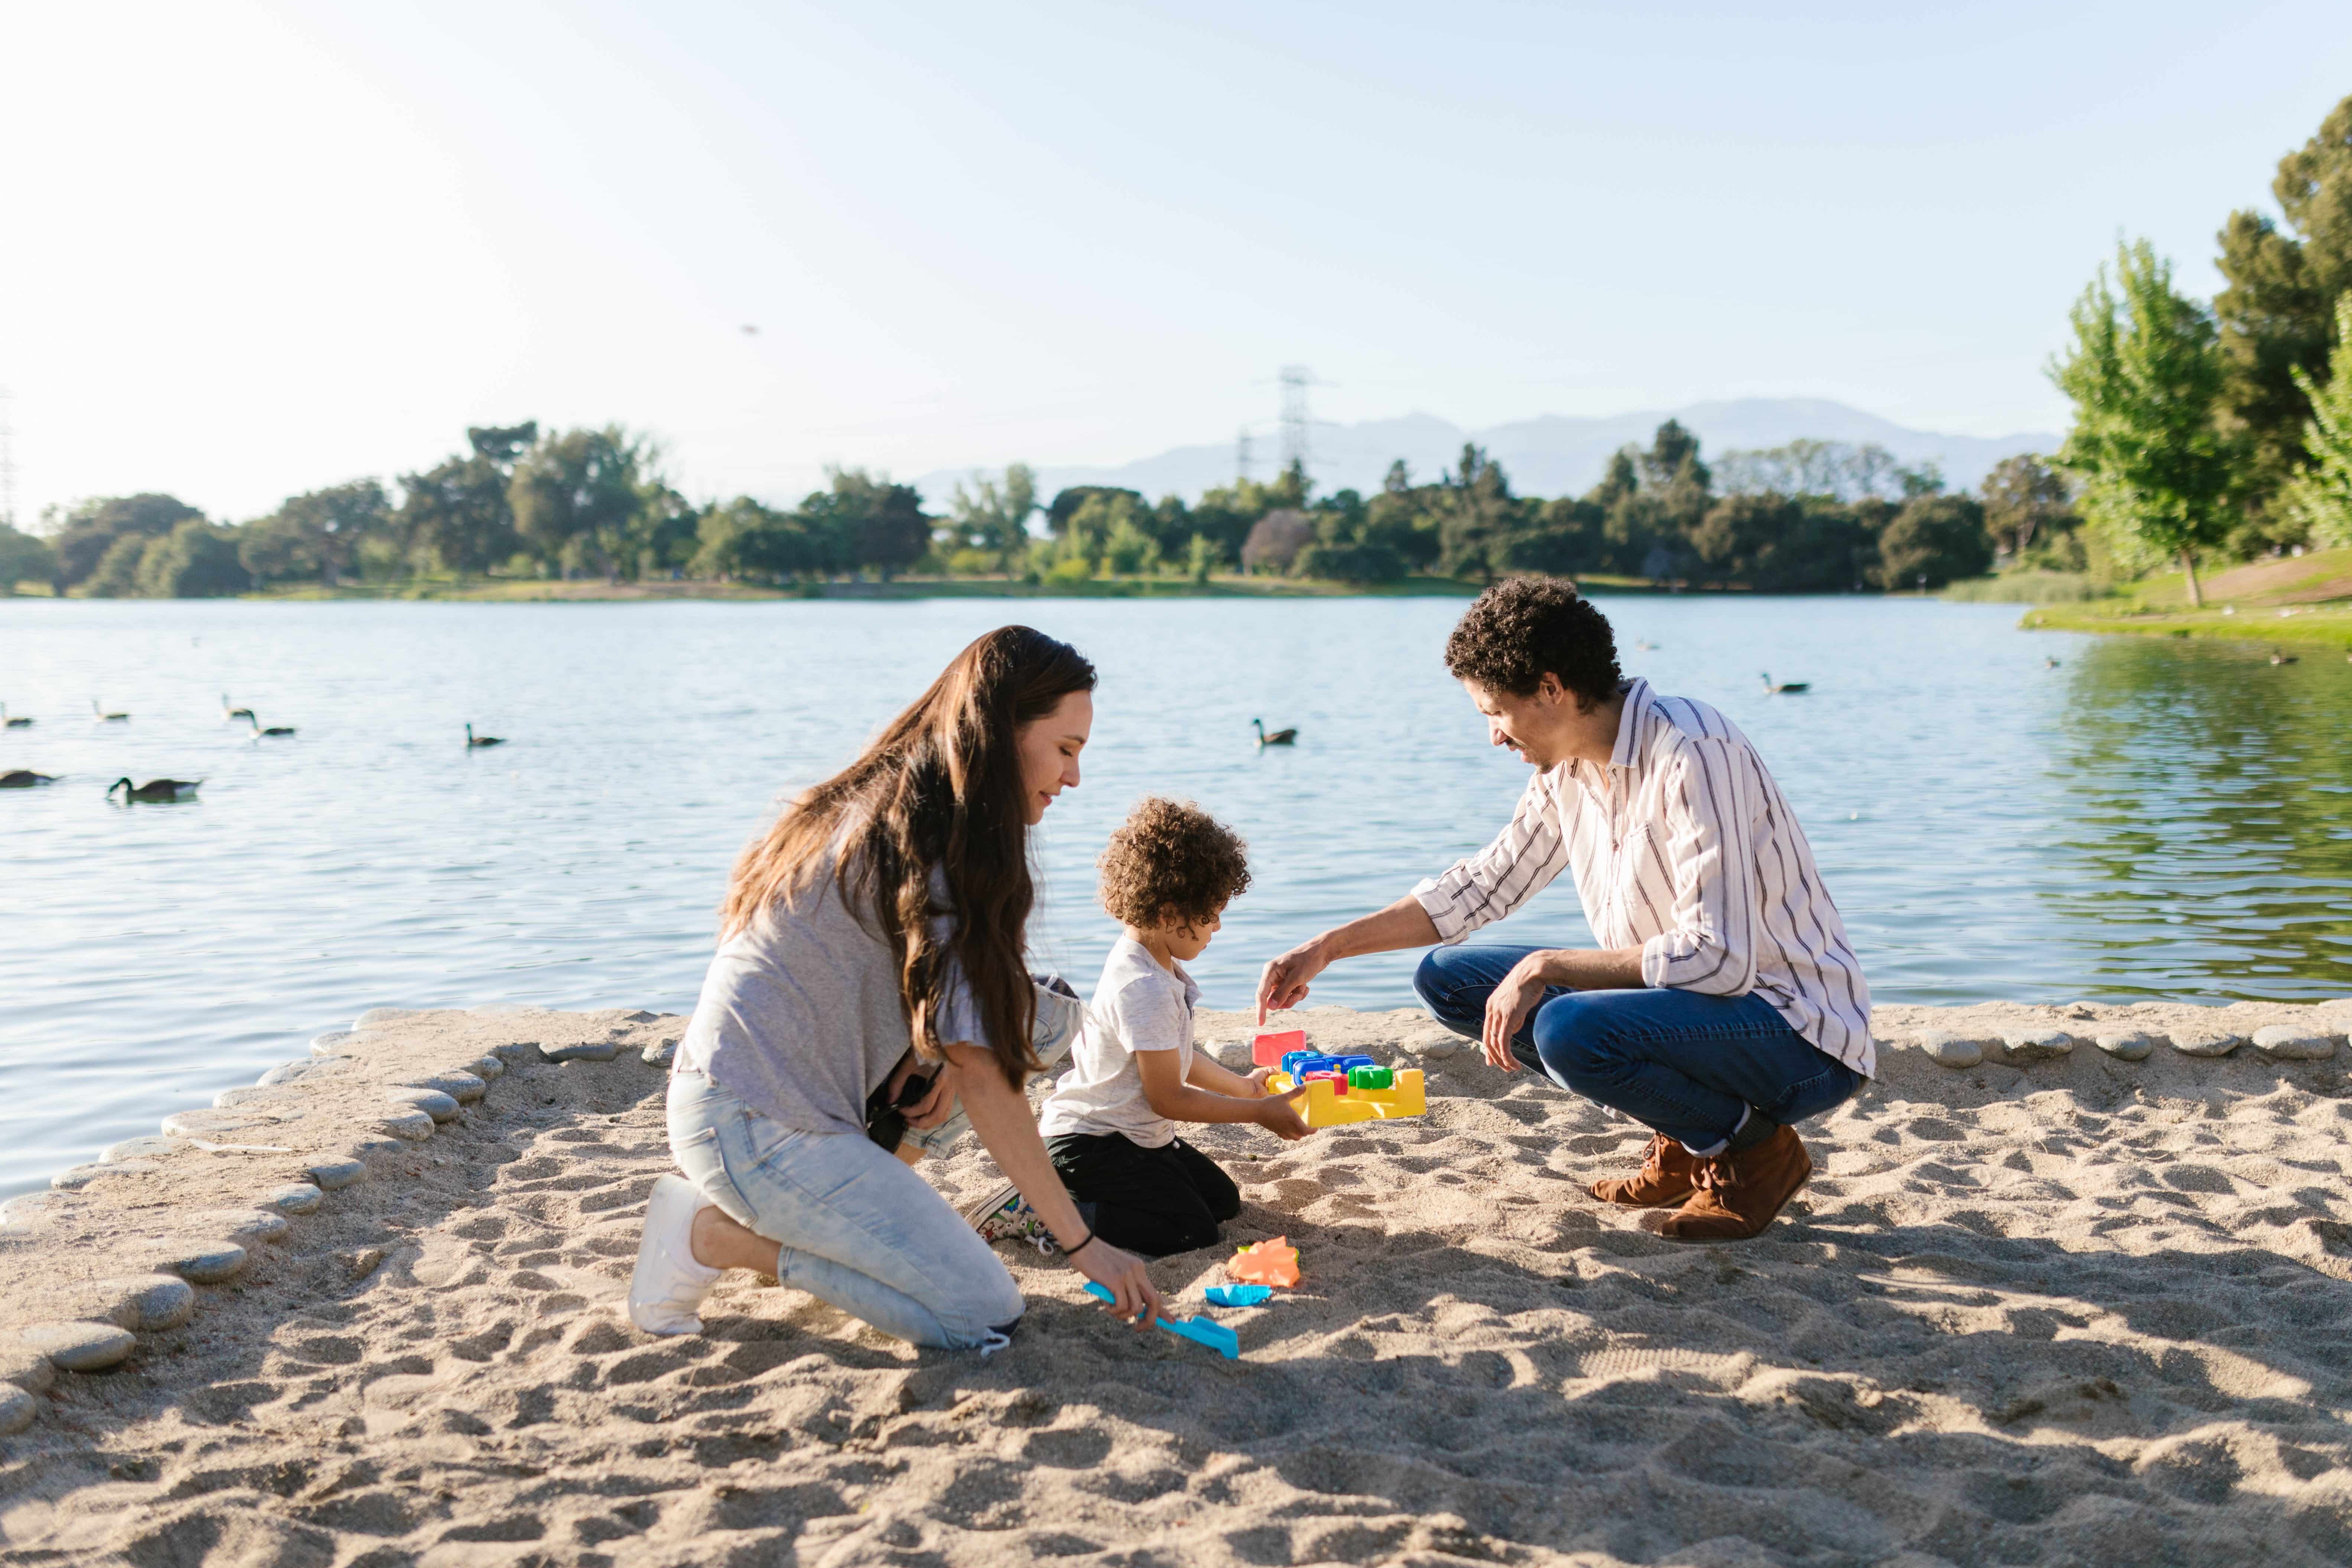 picture-of-a-man-and-woman-playing-with-their-young-son-in-the-sand-next-to-the-water